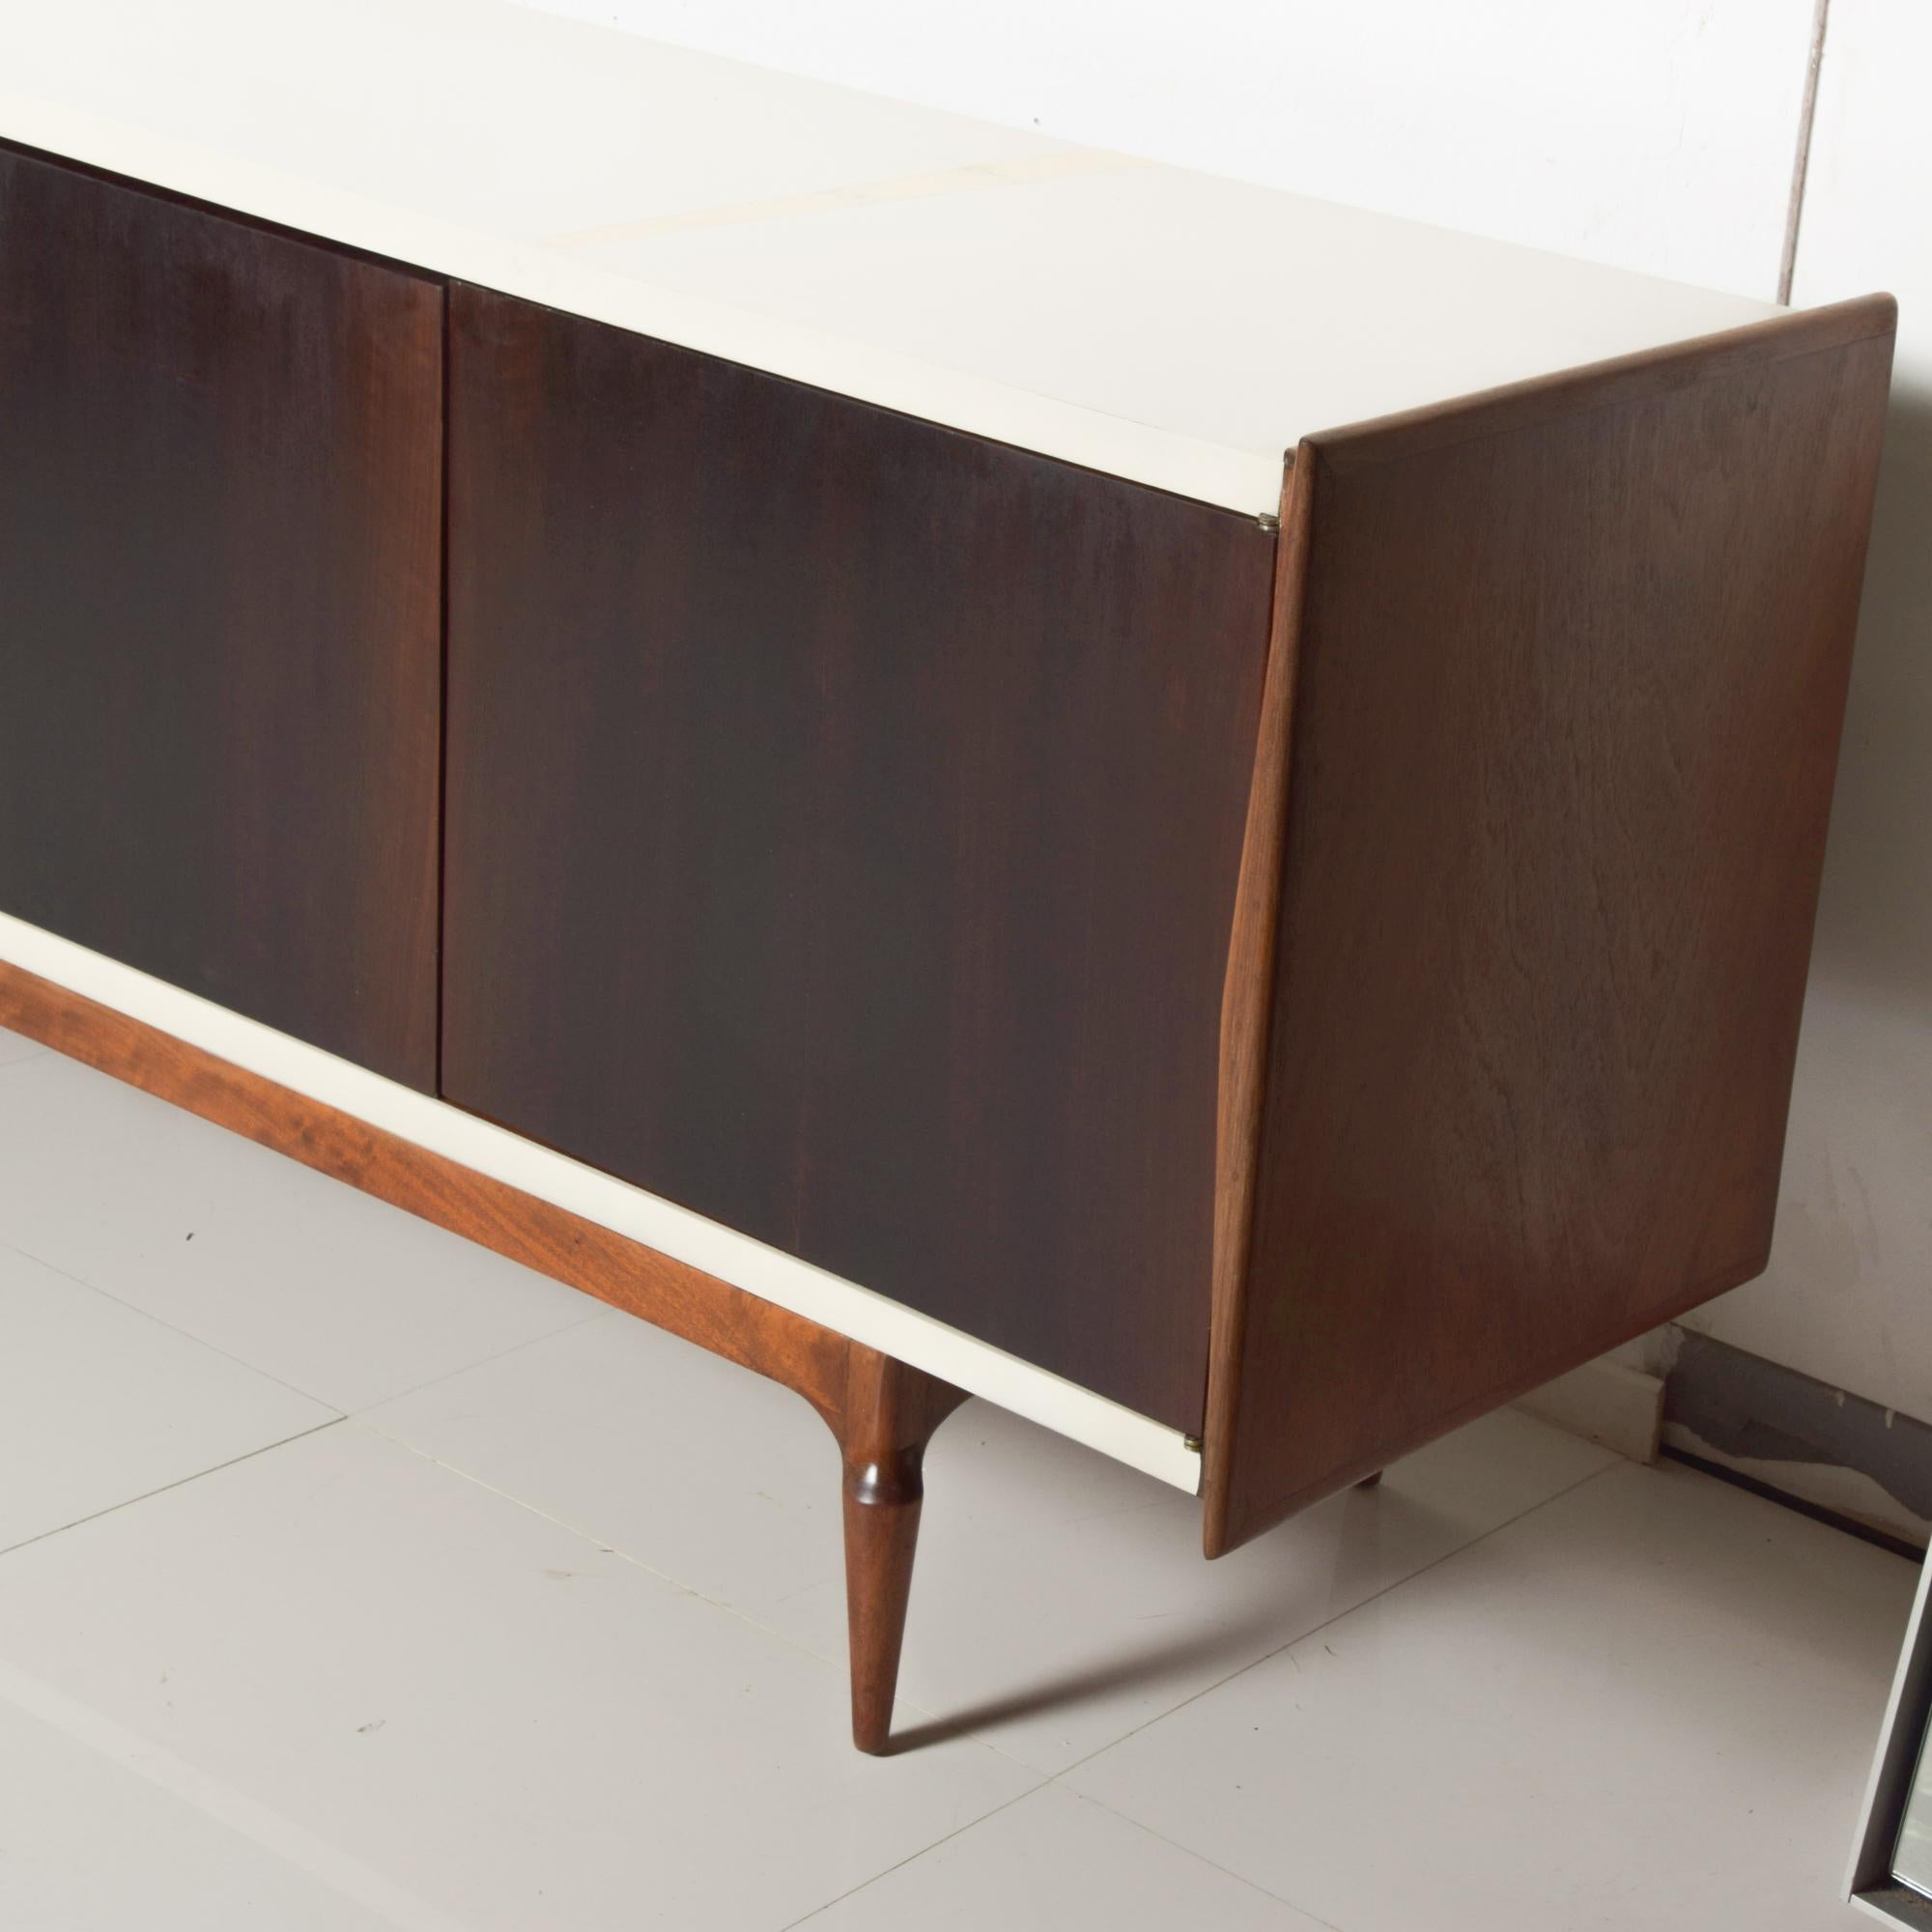 Mexican 1960s Magnificently Long Credenza Two Tone Lacquer & Wood Monterrey, Mexico For Sale